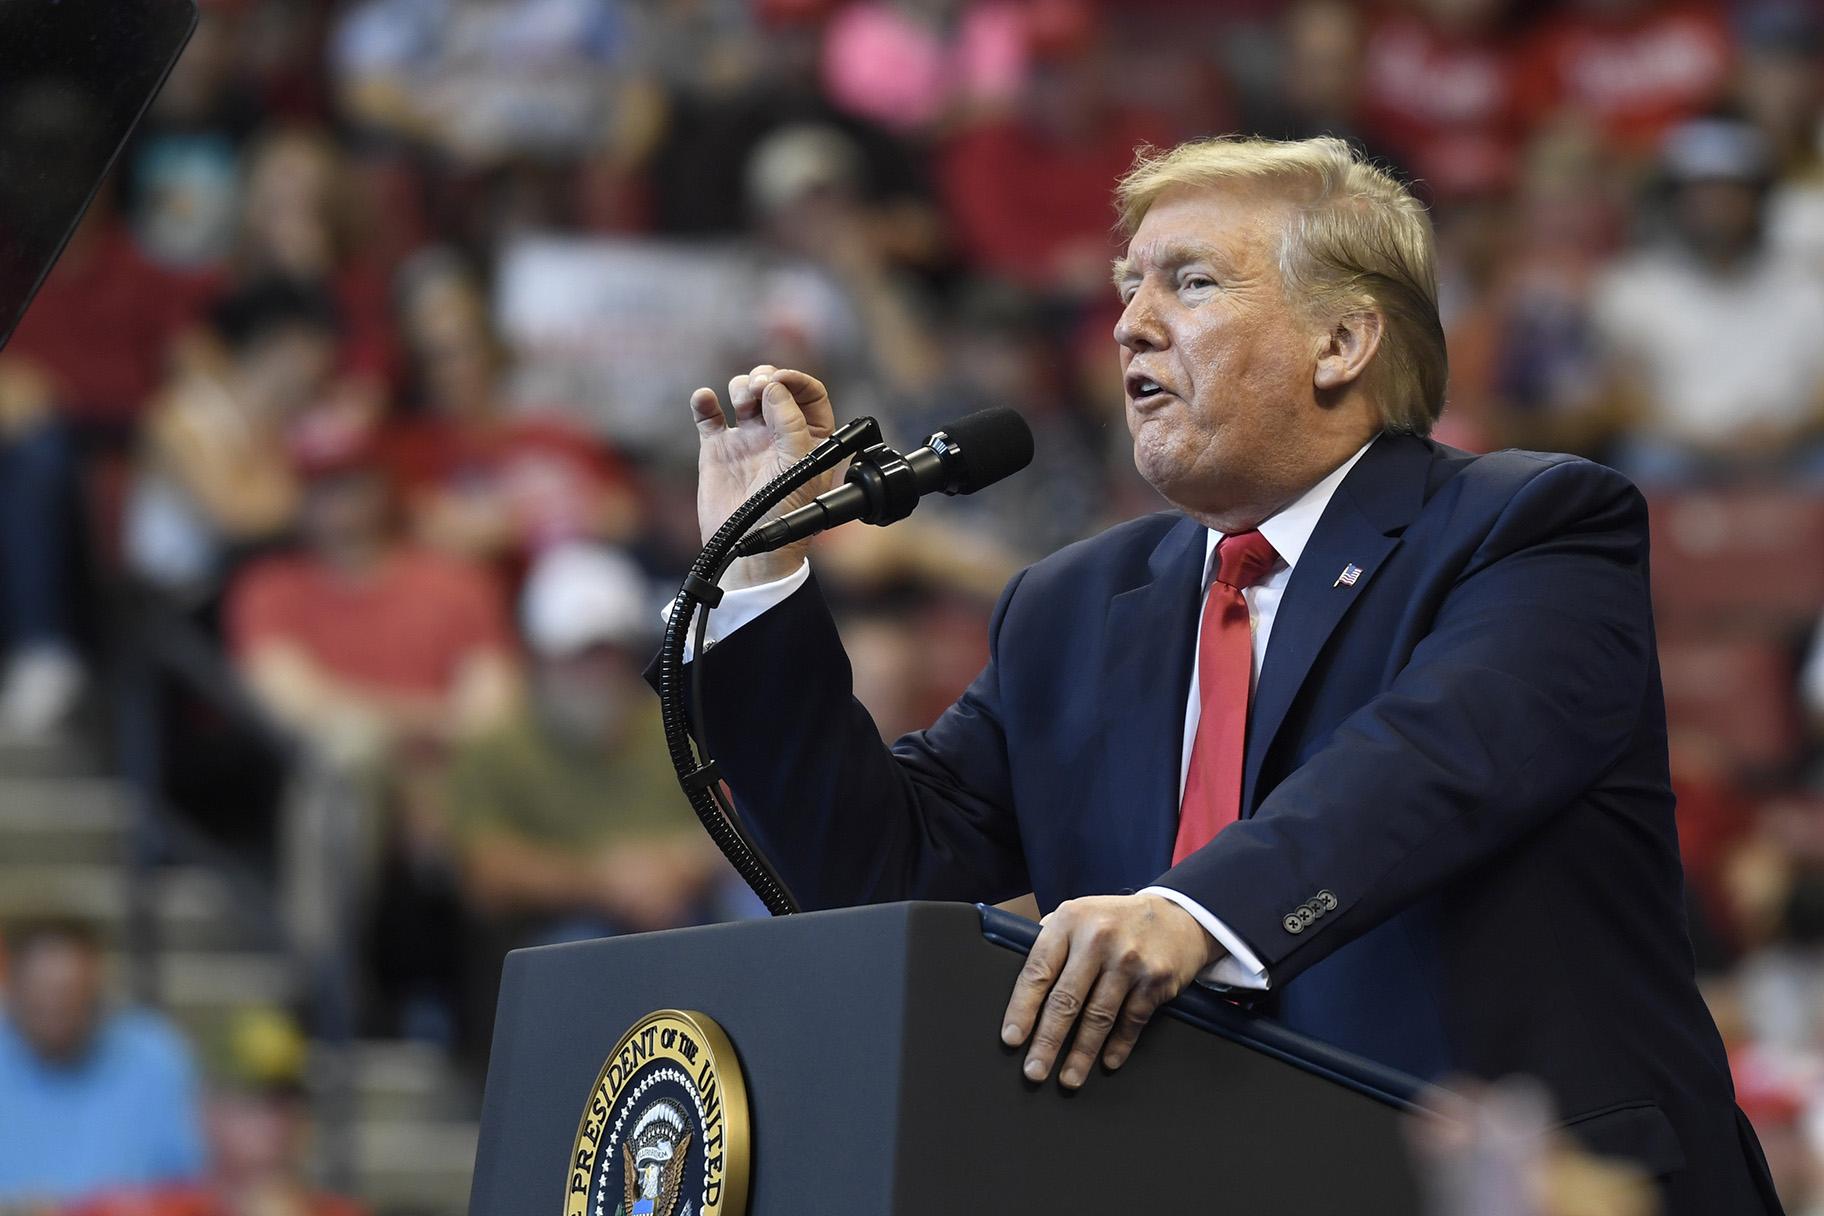 President Donald Trump speaks at a campaign rally in Sunrise, Fla., Tuesday, Nov. 26, 2019. (AP Photo / Susan Walsh)